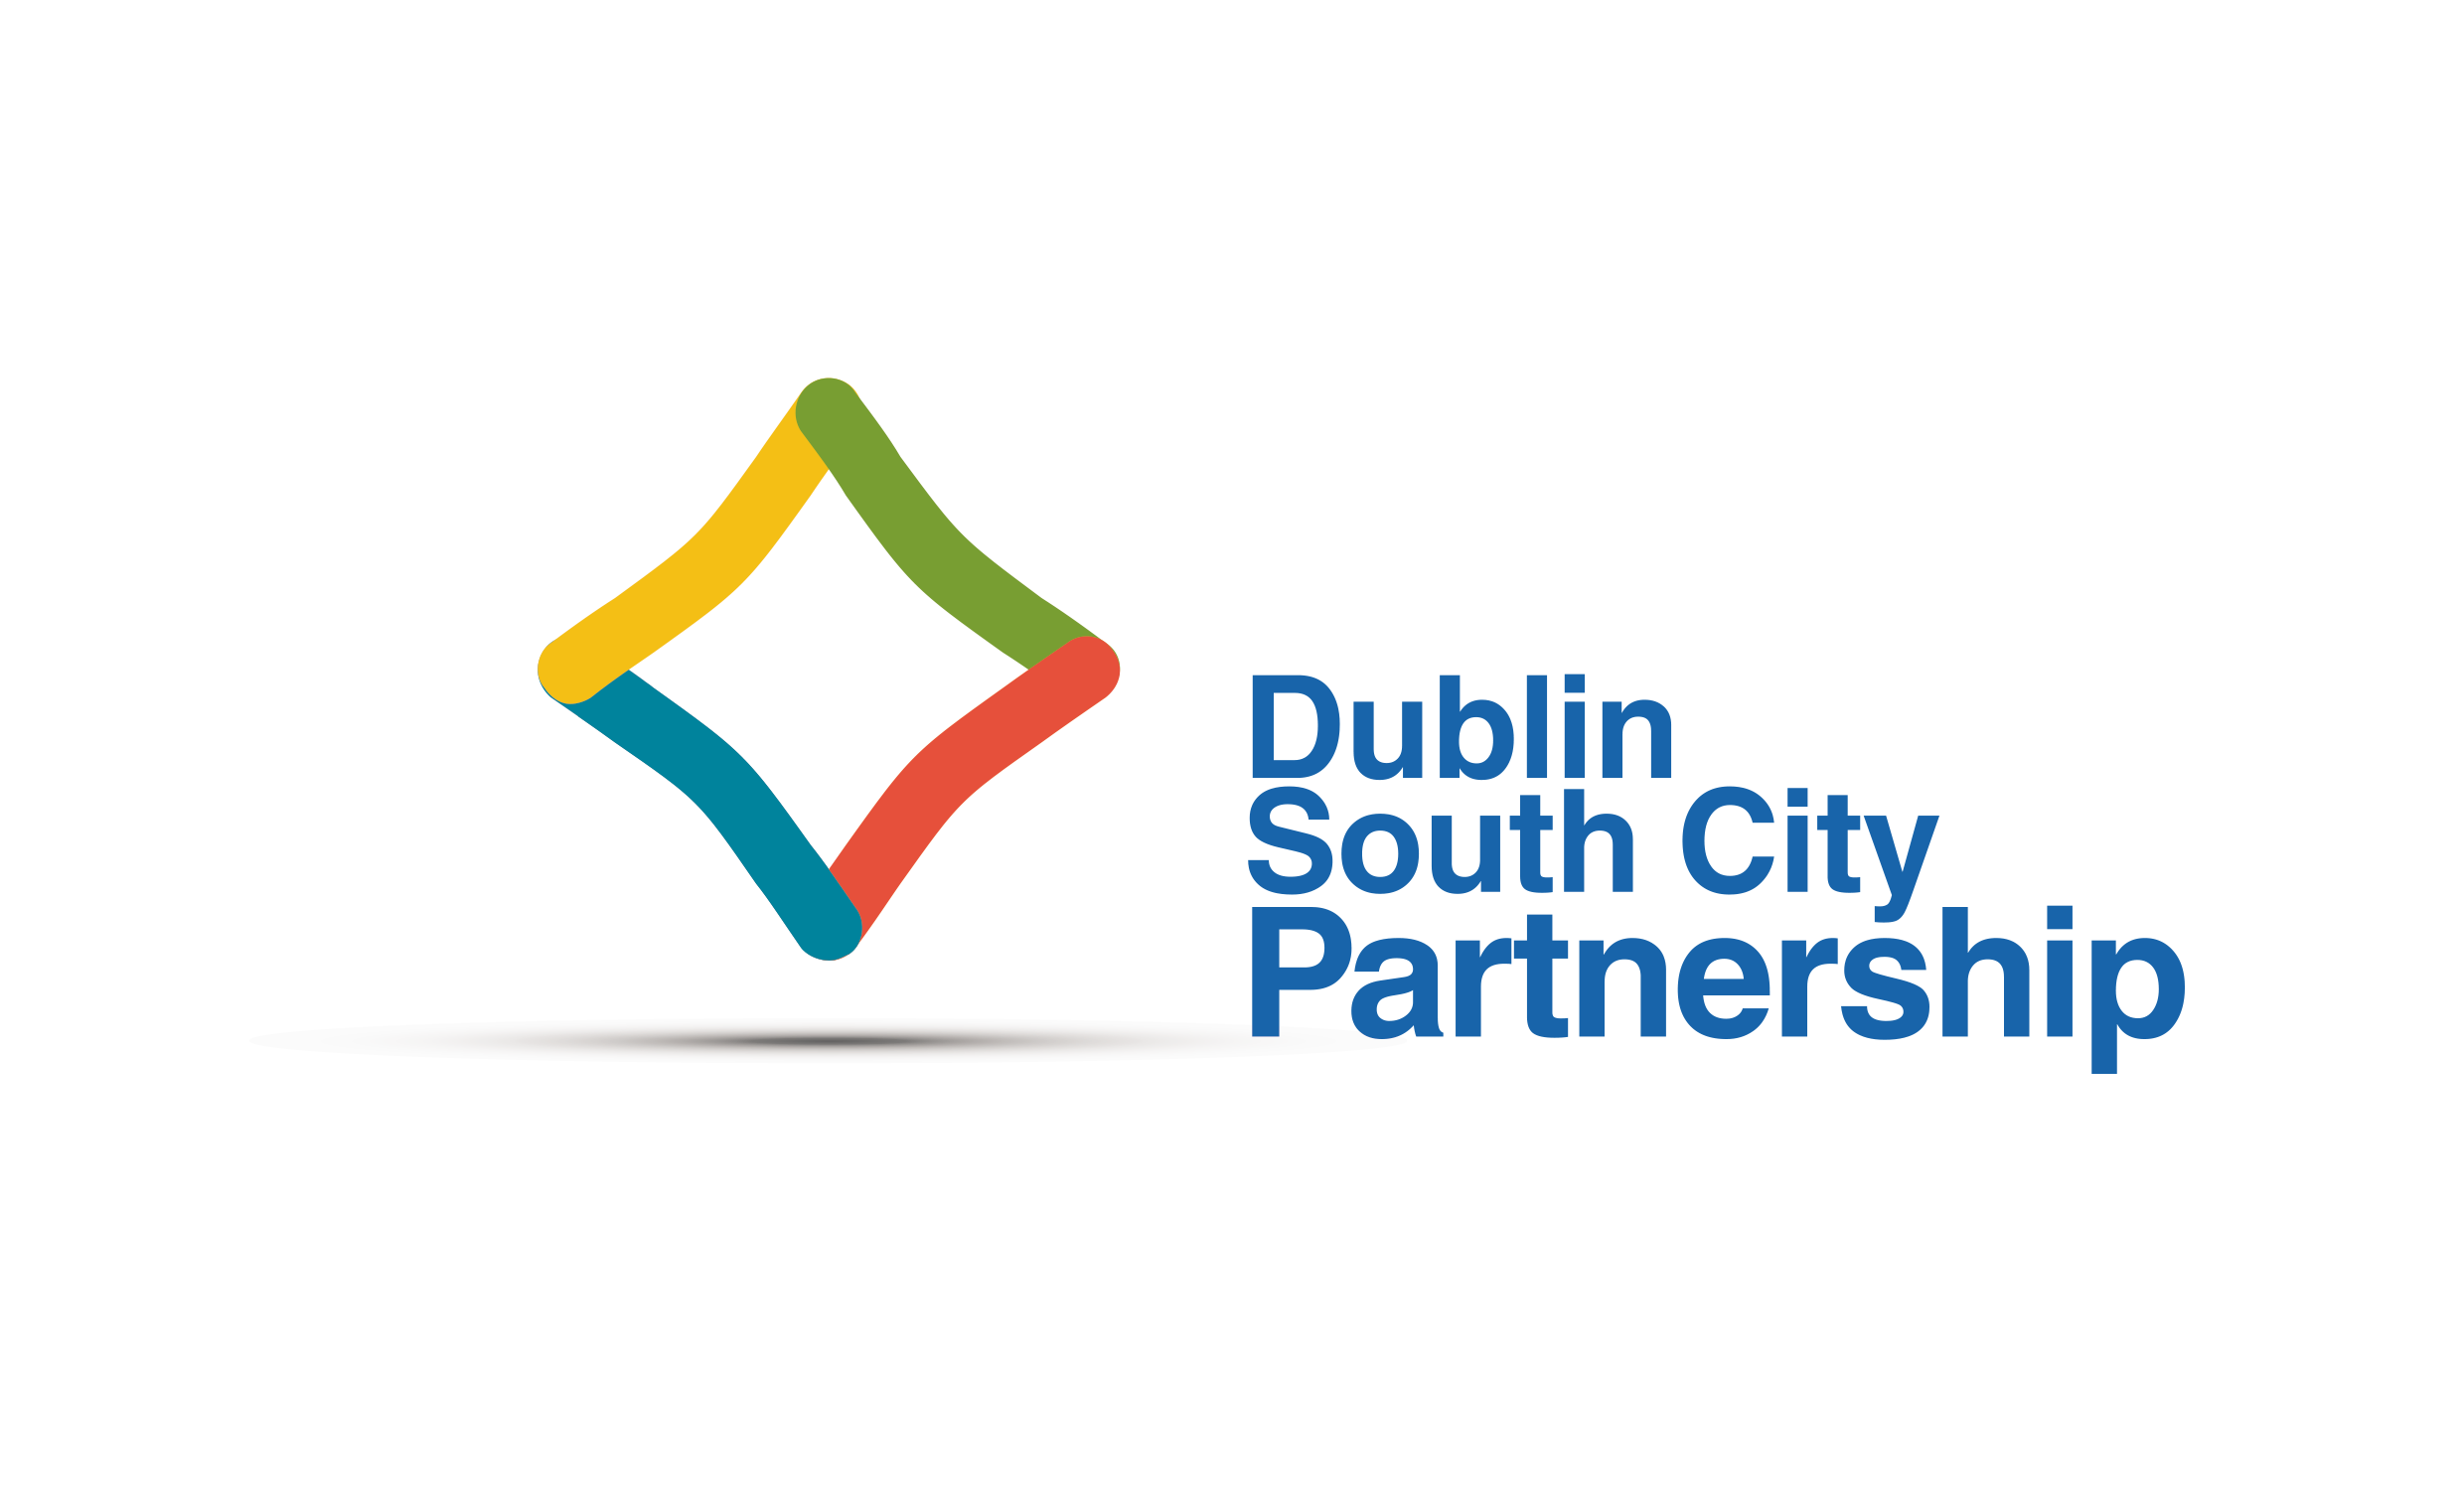 Dublin South City Partnership supported by the Rialto Community Network